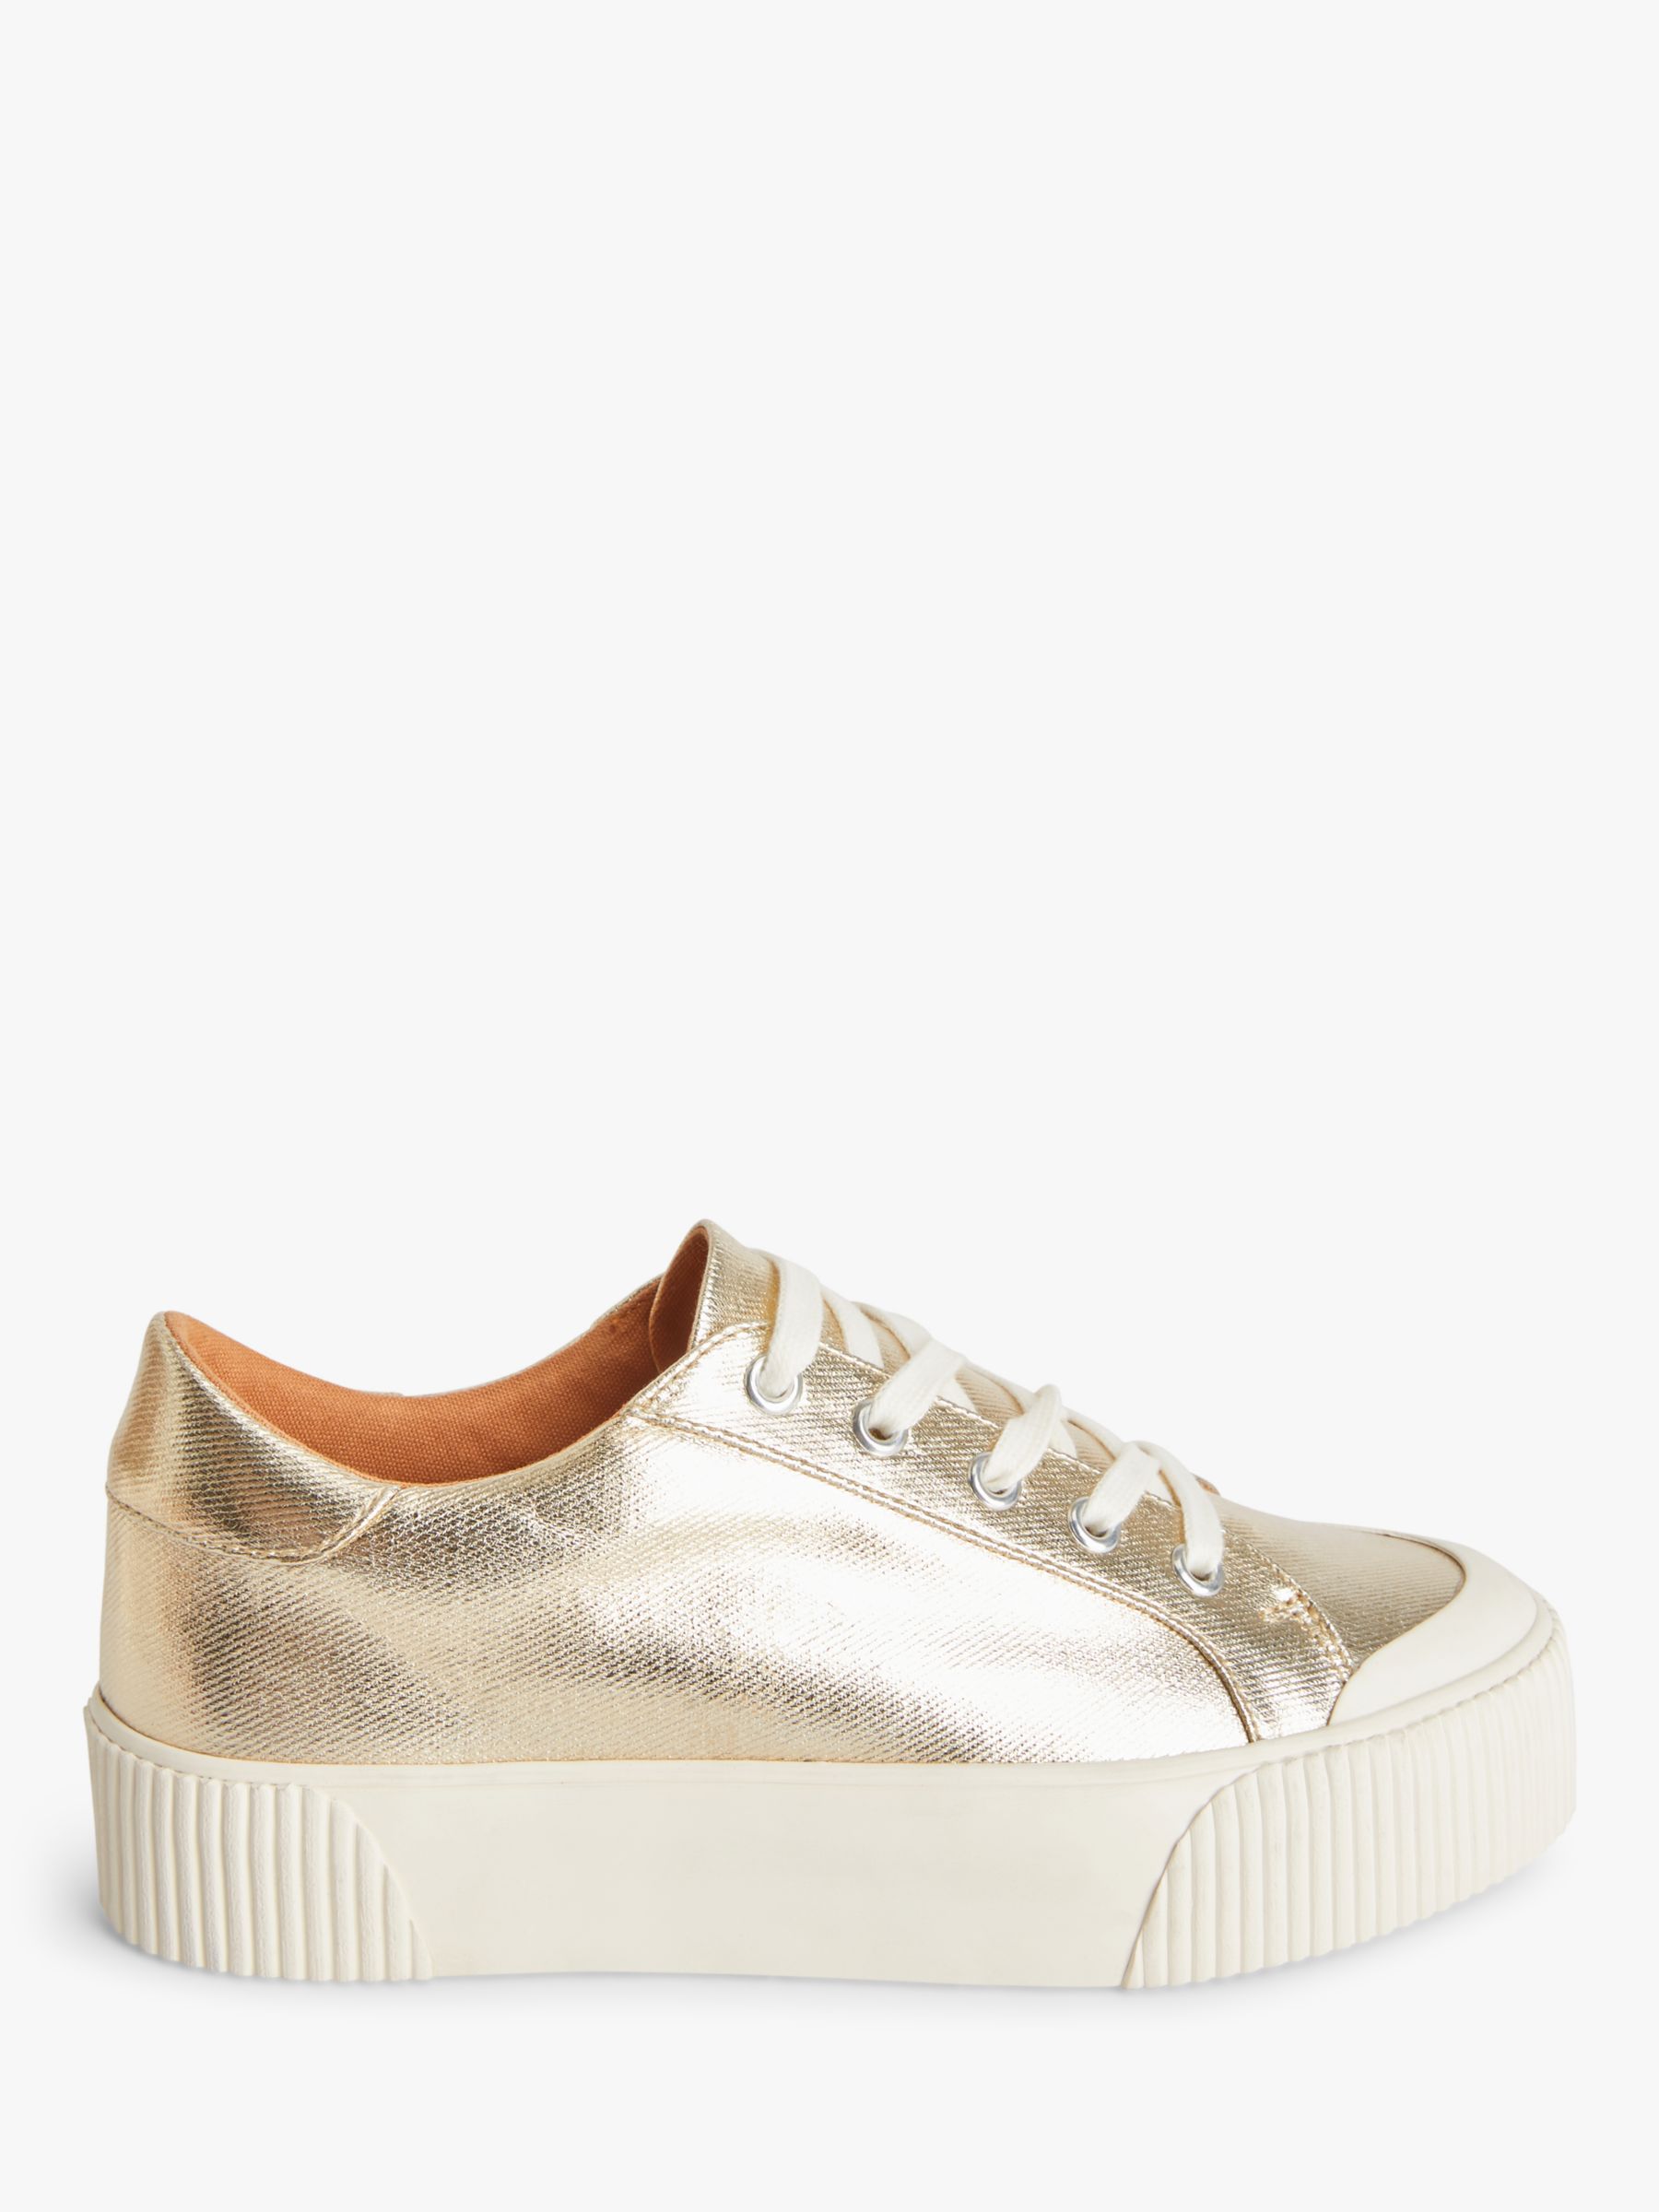 AND/OR Eloisa Flatform Metallic Lace Up Trainers, Gold, 3